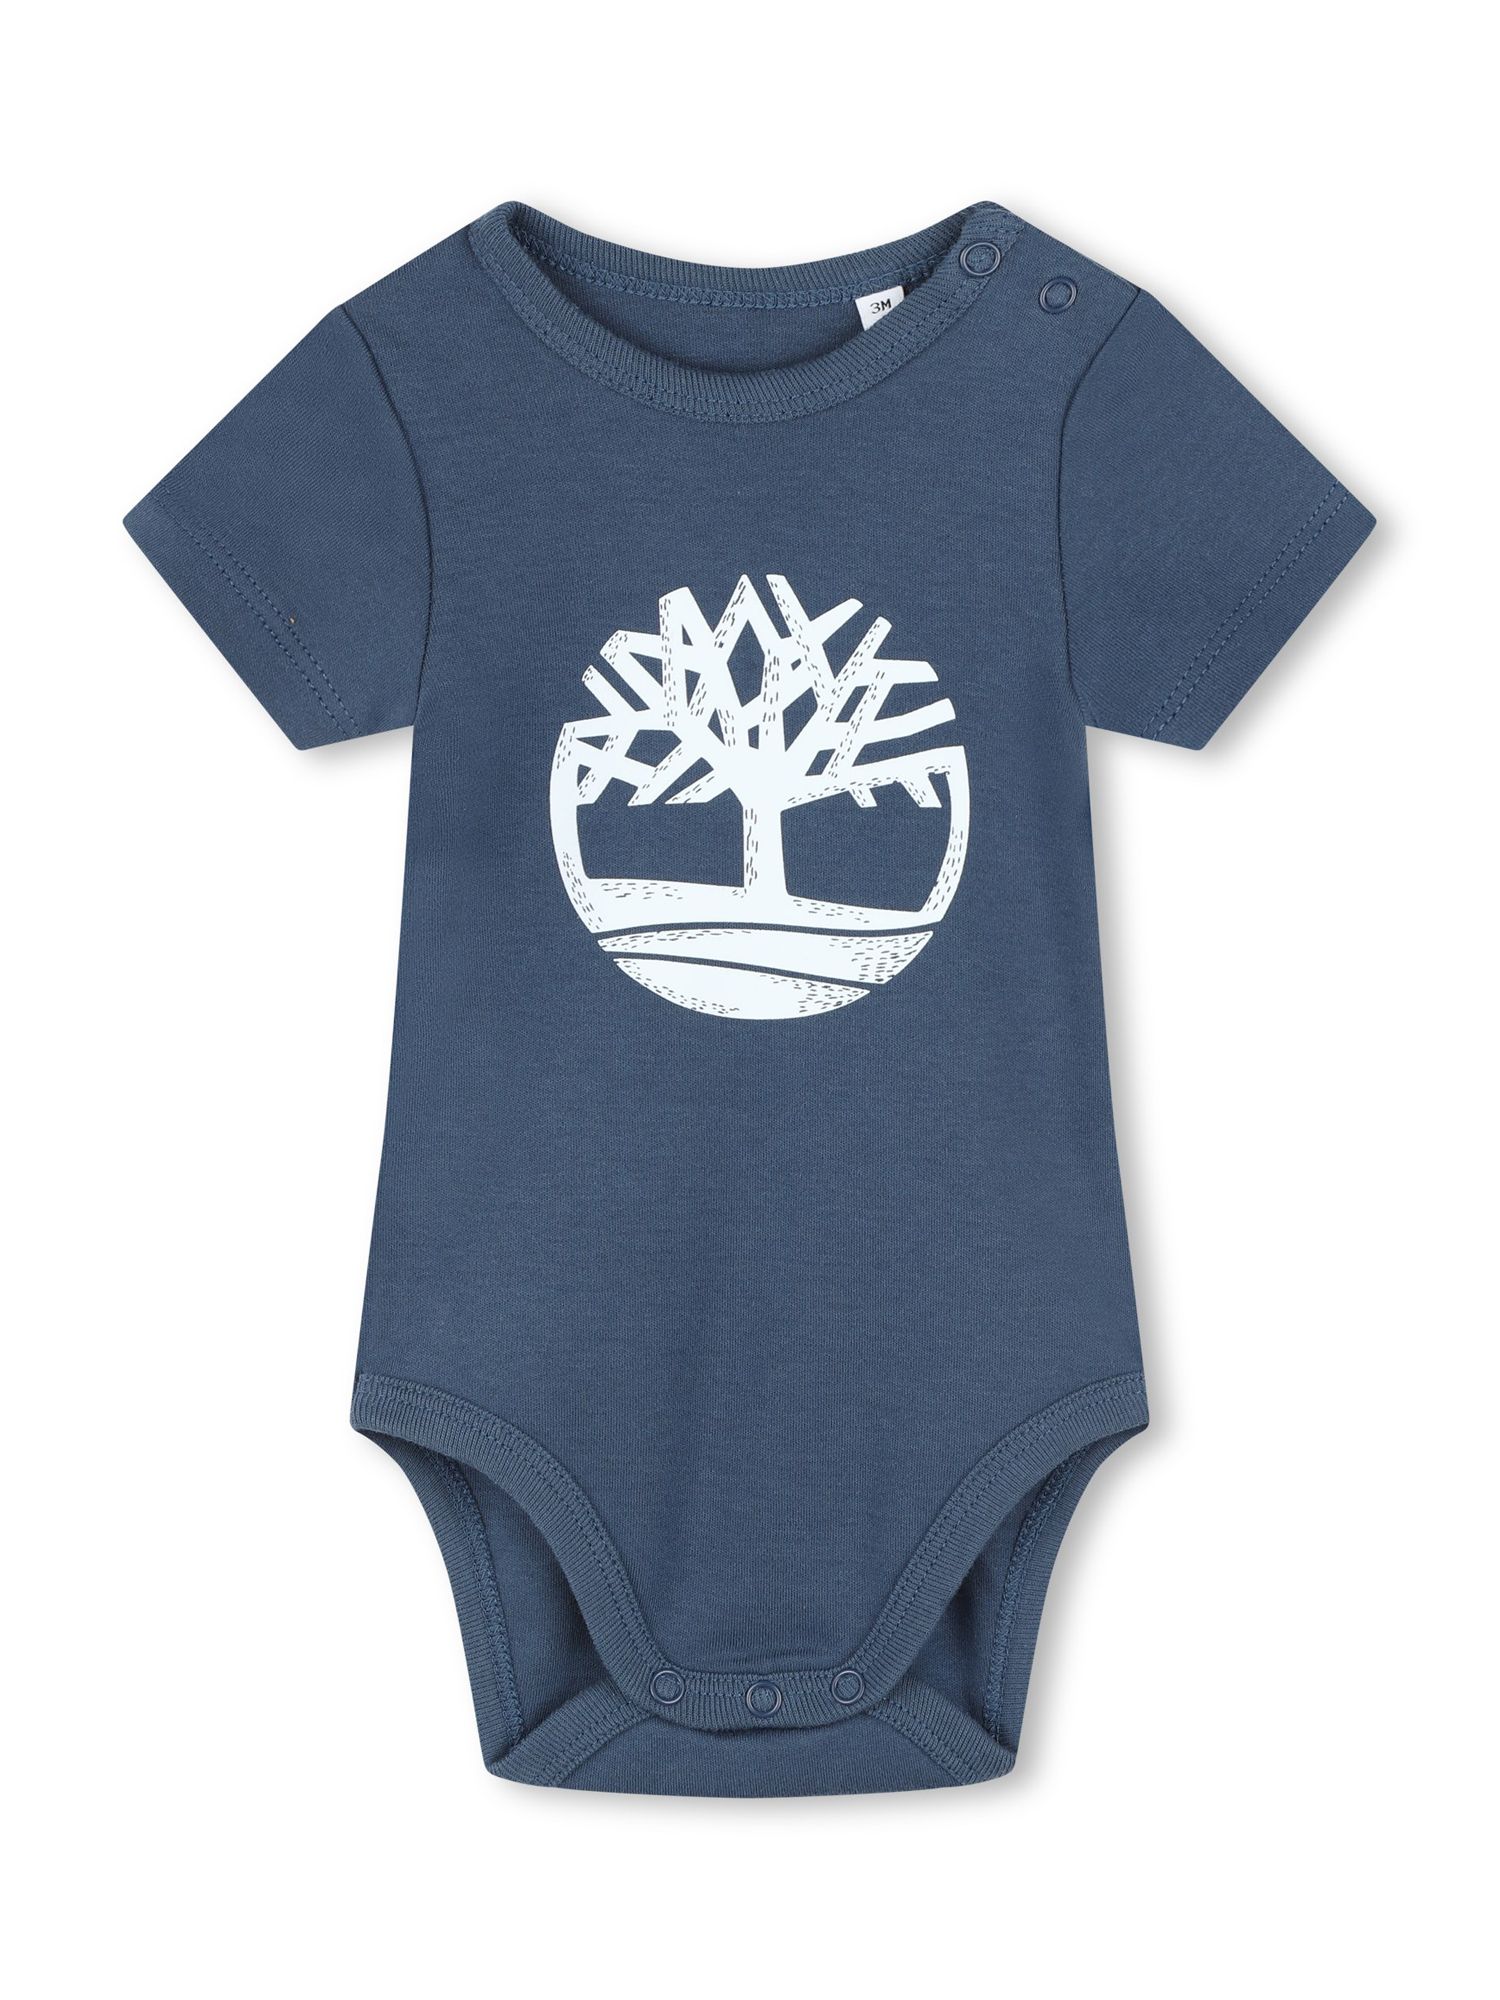 Buy Timberland Baby Logo & Abstract Print Bodysuits, Pack Of 2, Blue/Multi Online at johnlewis.com